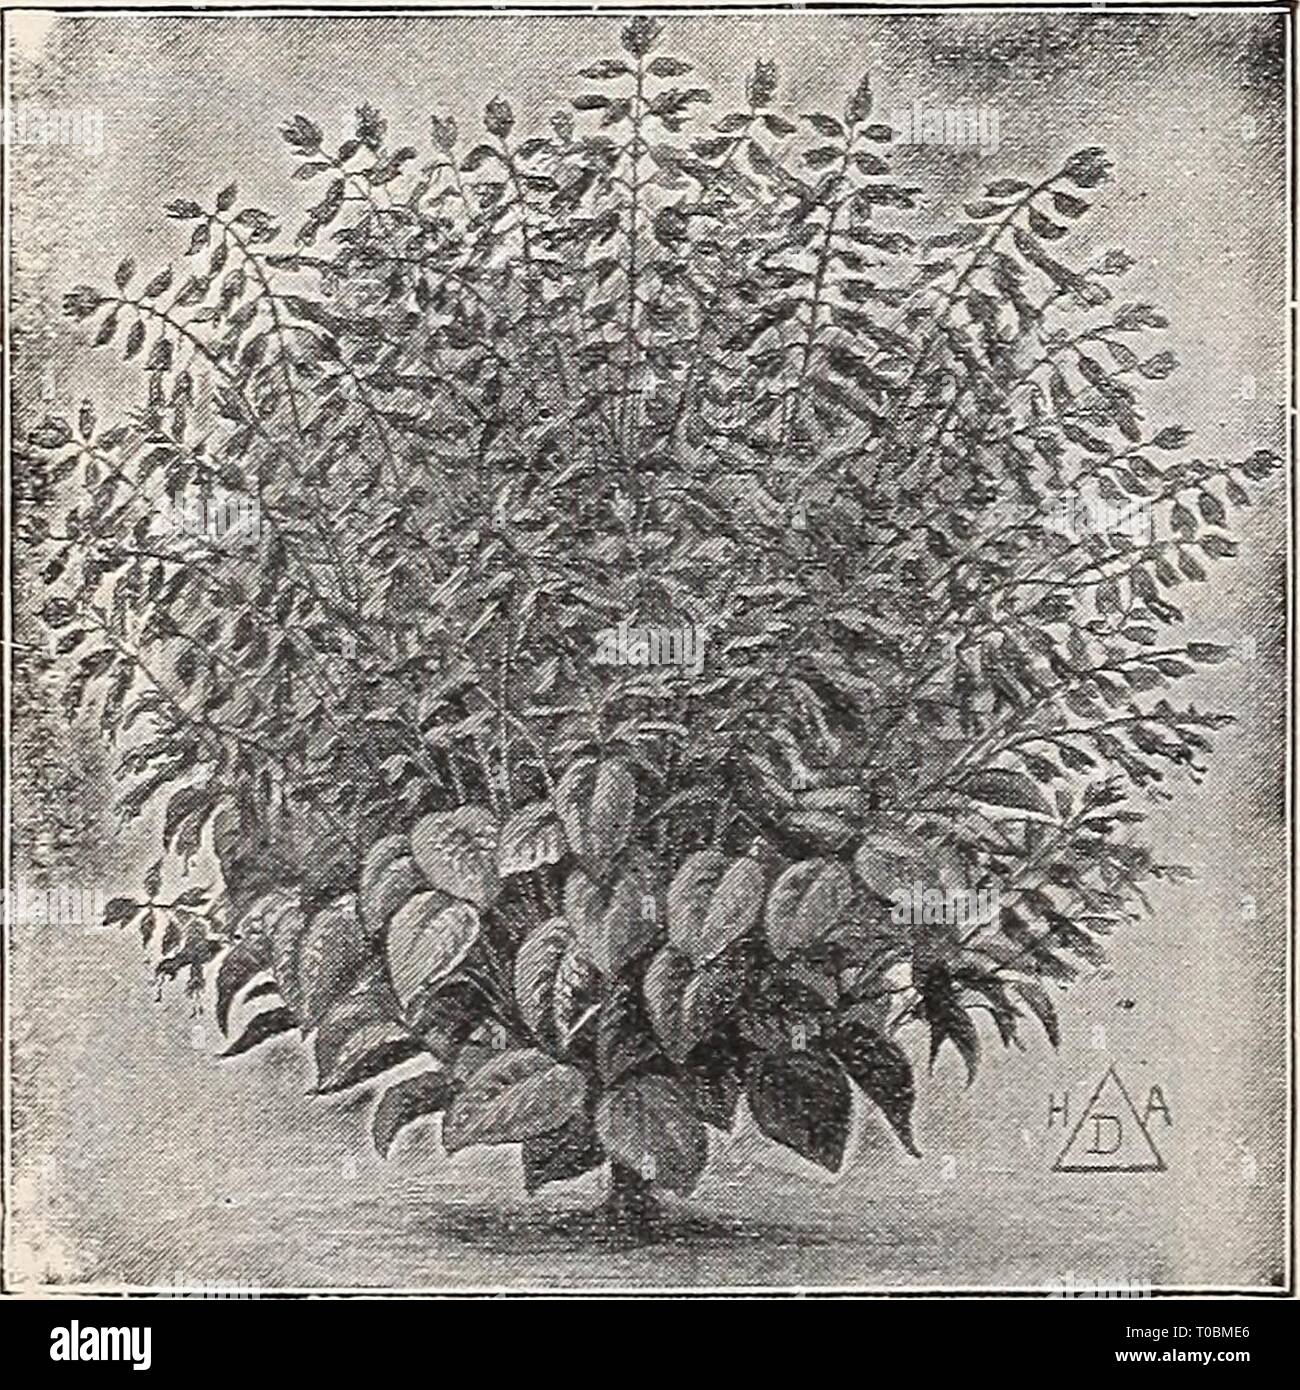 Dreer's garden book 1918 (1918) Dreer's garden book 1918 dreersgardenbook1918henr Year: 1918  Pepekomia Maculosa PEPEROMIA Maculosa. A pretly dwarf, ornamental, foliage plant, the thick leaves being bright green, veined silvery-white; exceedingly useful as a pot plant for the window. 25 cts. each; $2.50 per doz. PLUMBAGO Capensis. Light lavender- blue. —Alba. Color creamy white. Coccinea Superba. Long racemes of showy, brilliant, bright satiny-carmine flow- ers. 15 cts. each ; $1.50 per doz. POTHOS ARGYR^EA A pretty hothouse climber with deep green foliage, nicely variegated with silvery-white Stock Photo